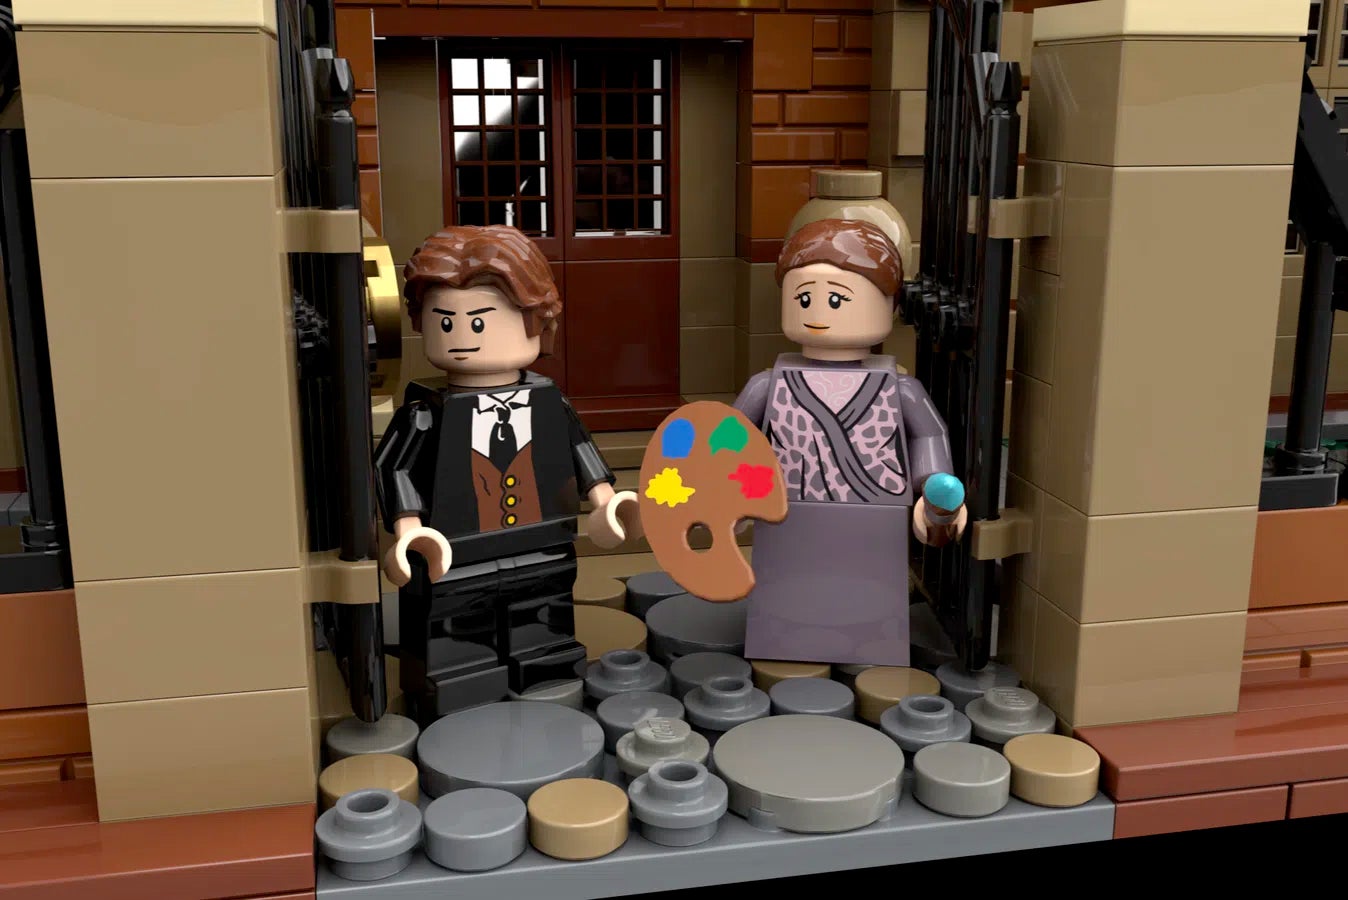 Edward and Abigail, looking happy and content and not at all influenced by mysterious evil forces.  (Image: Roger Schembri / Lego Ideas)